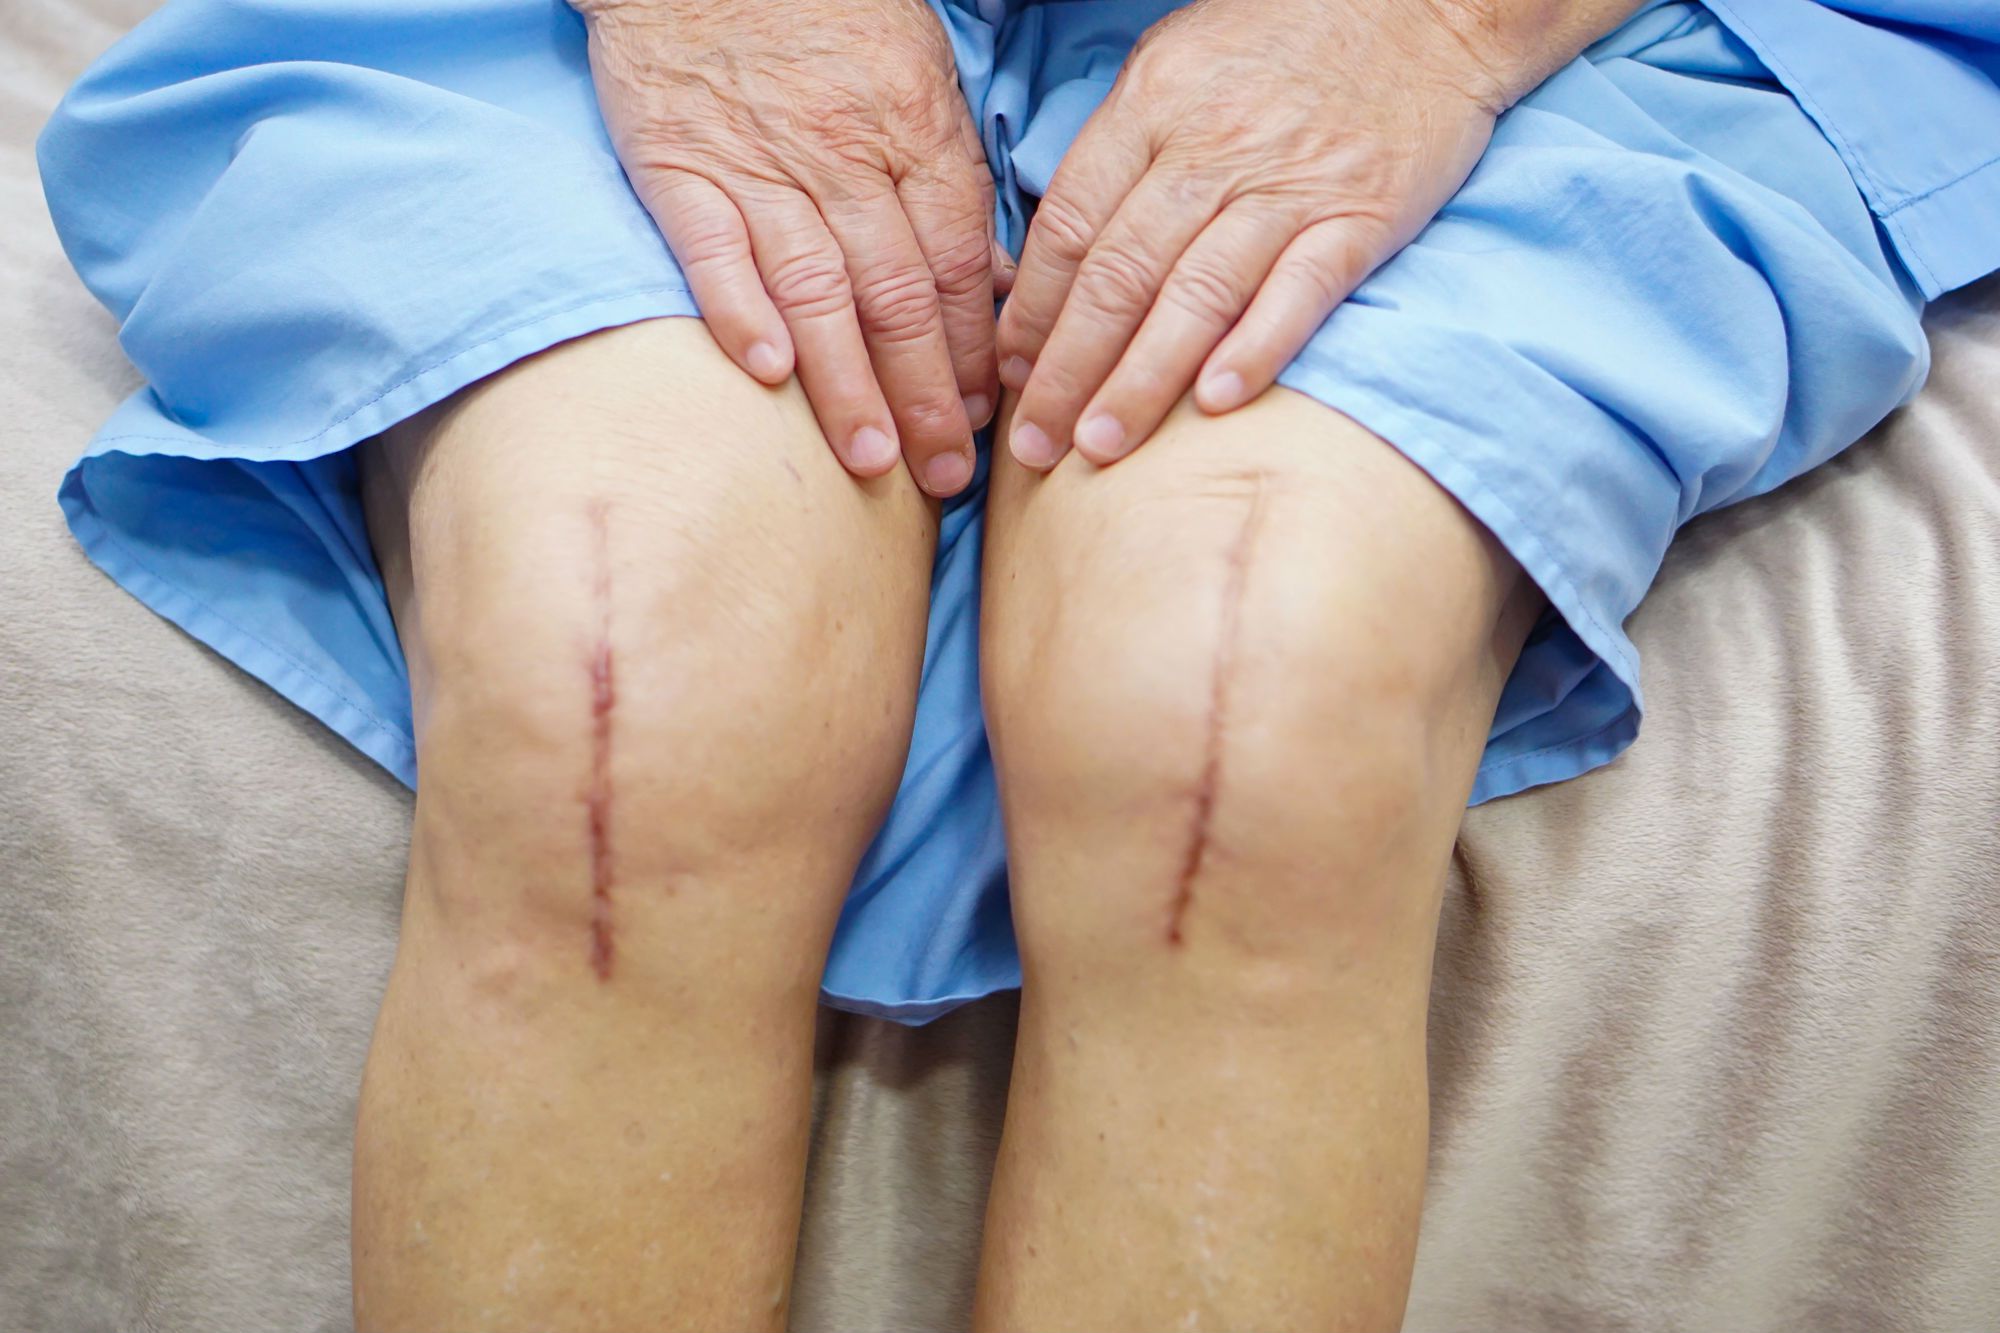 disadvantages of knee replacement surgery